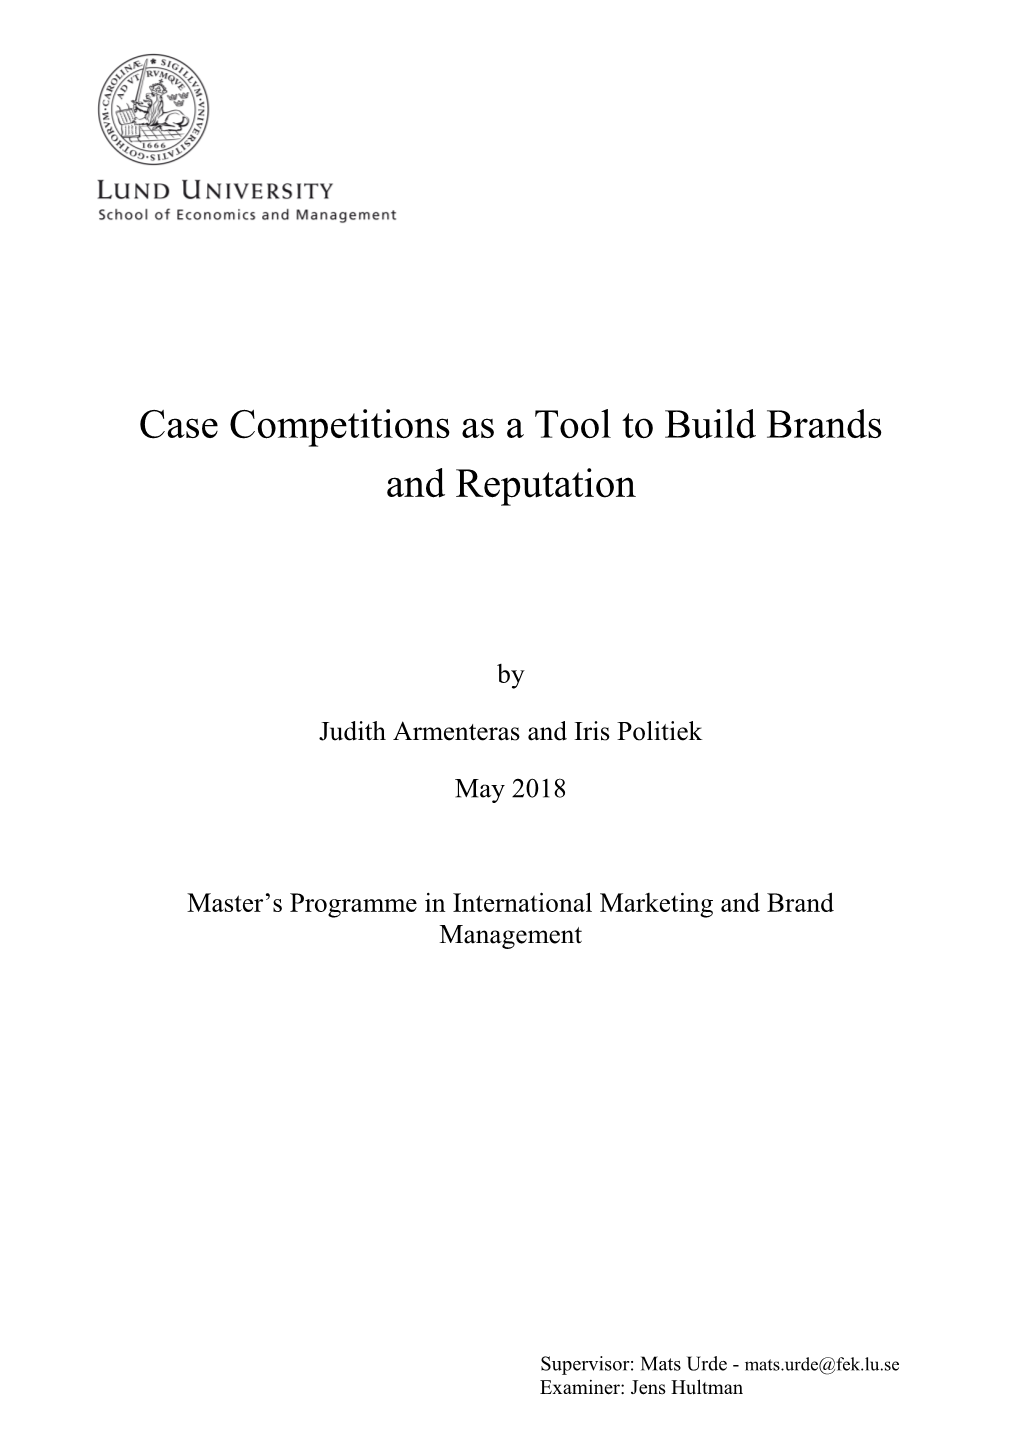 Case Competitions As a Tool to Build Brands and Reputation